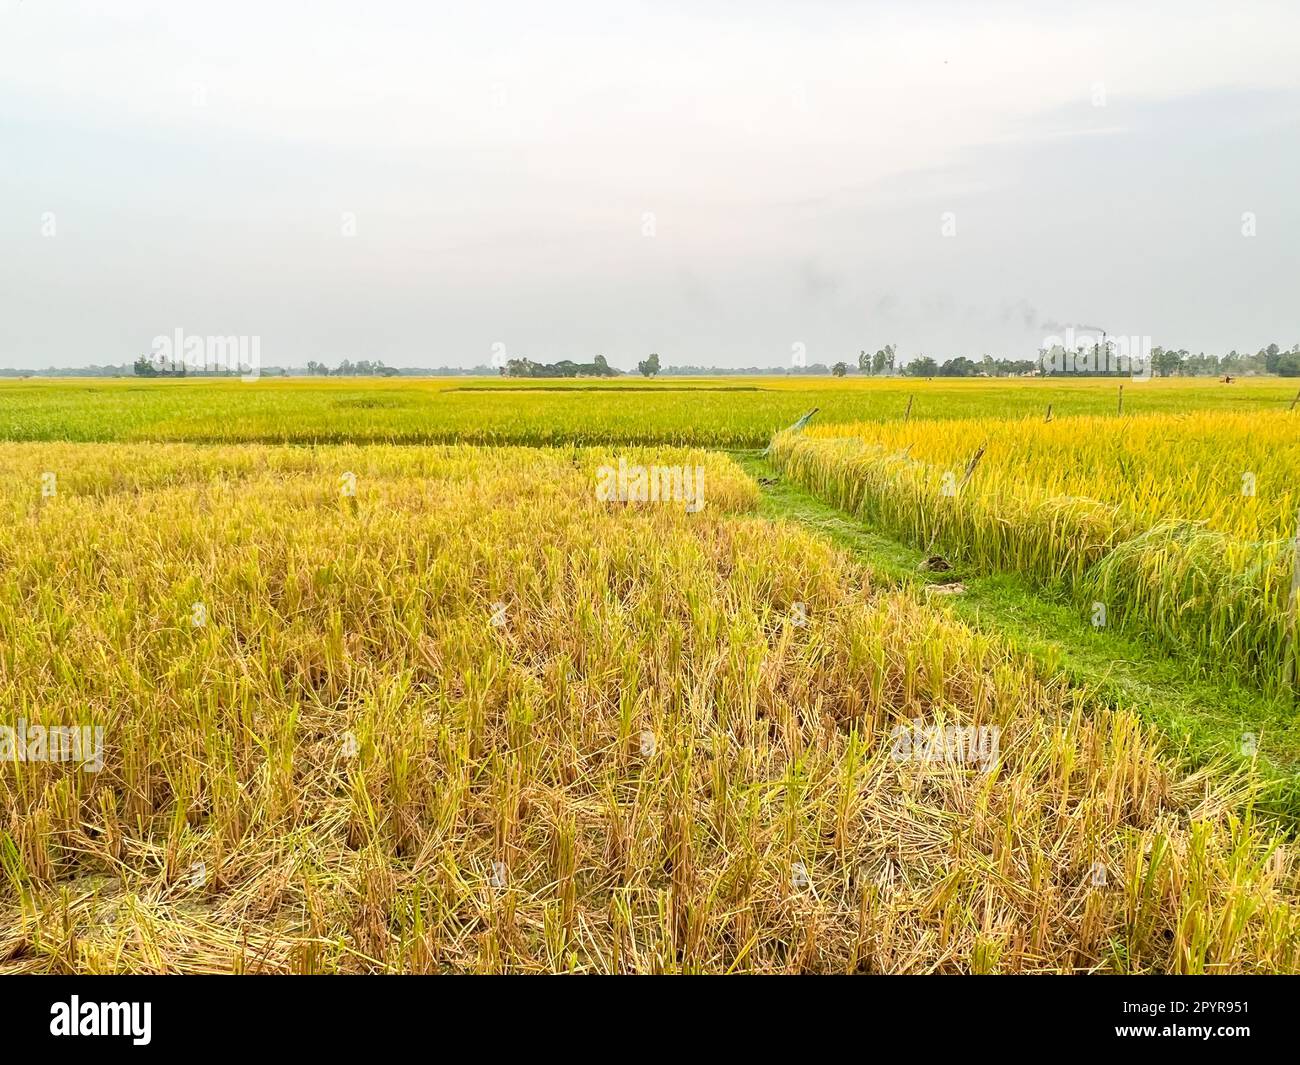 Rice field is seen in Bangladesh. Stock Photo